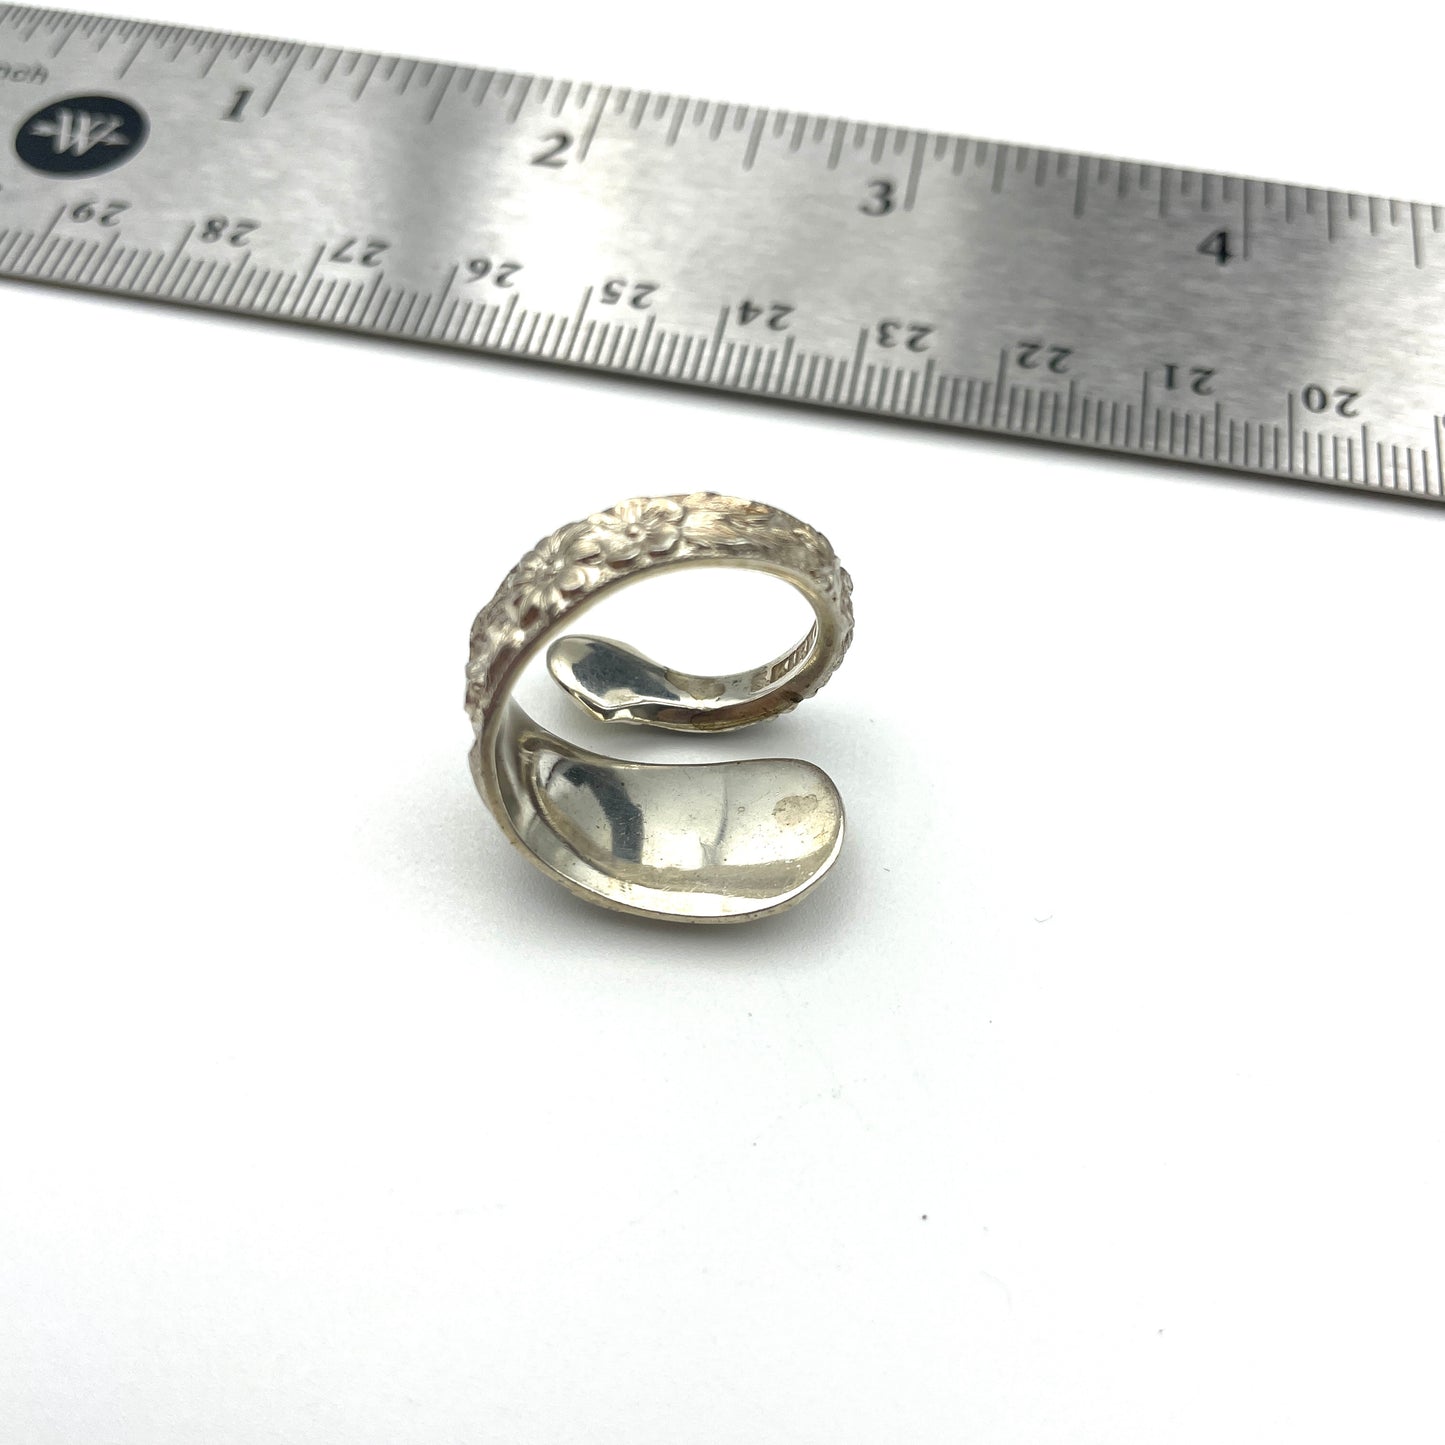 Vintage Bent Spoon Ring - Size 6